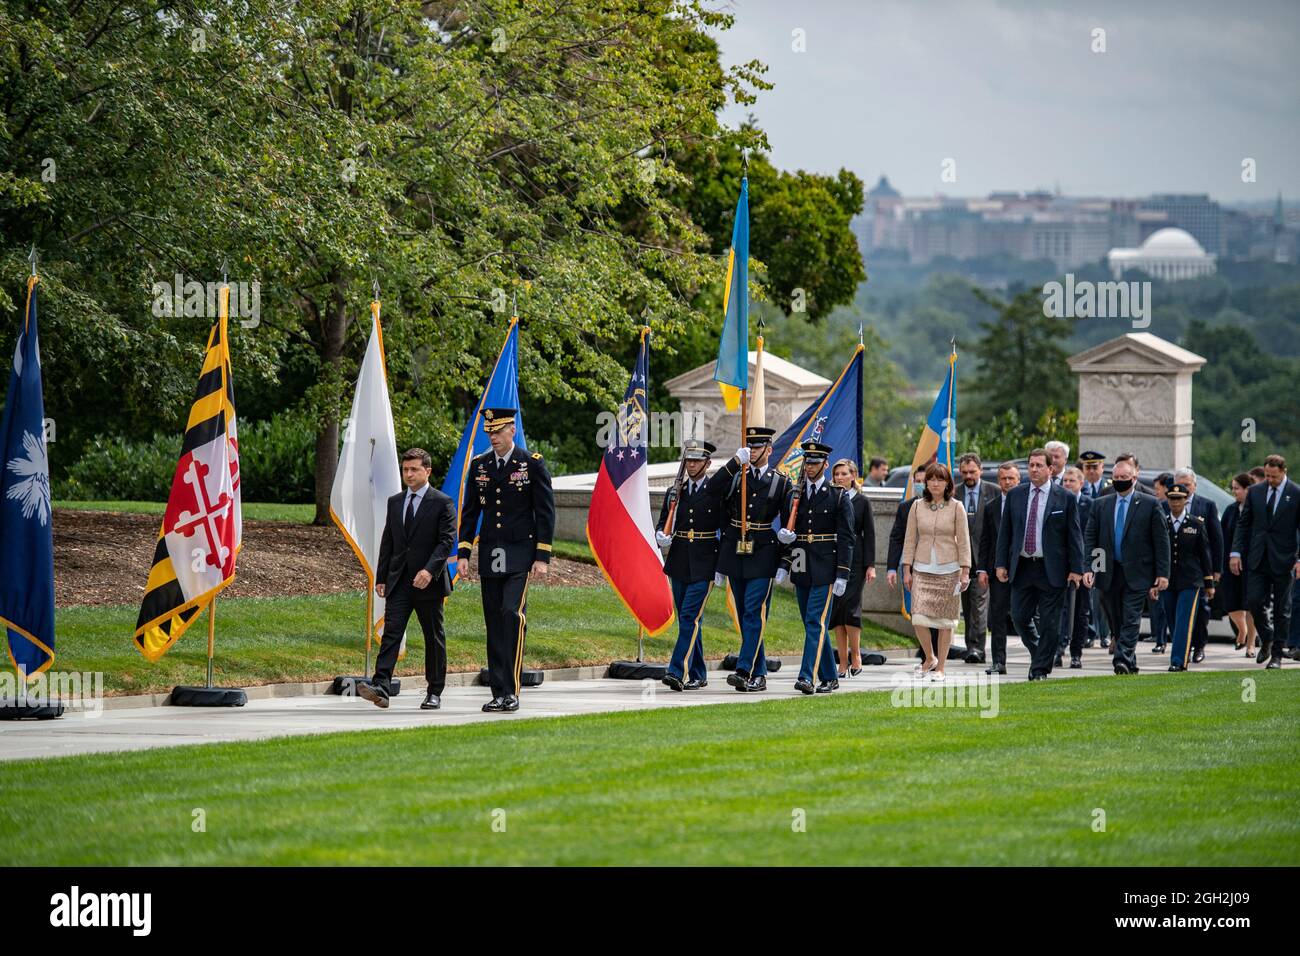 Ukrainian President Volodymyr Zelenskyy, left, is escorted by U.S. Army Maj. Gen. Allan Pepin during a full honors wreath laying ceremony at the Tomb of the Unknown Soldier at Arlington National Cemetery September 1, 2021 in Arlington, Virginia. Stock Photo